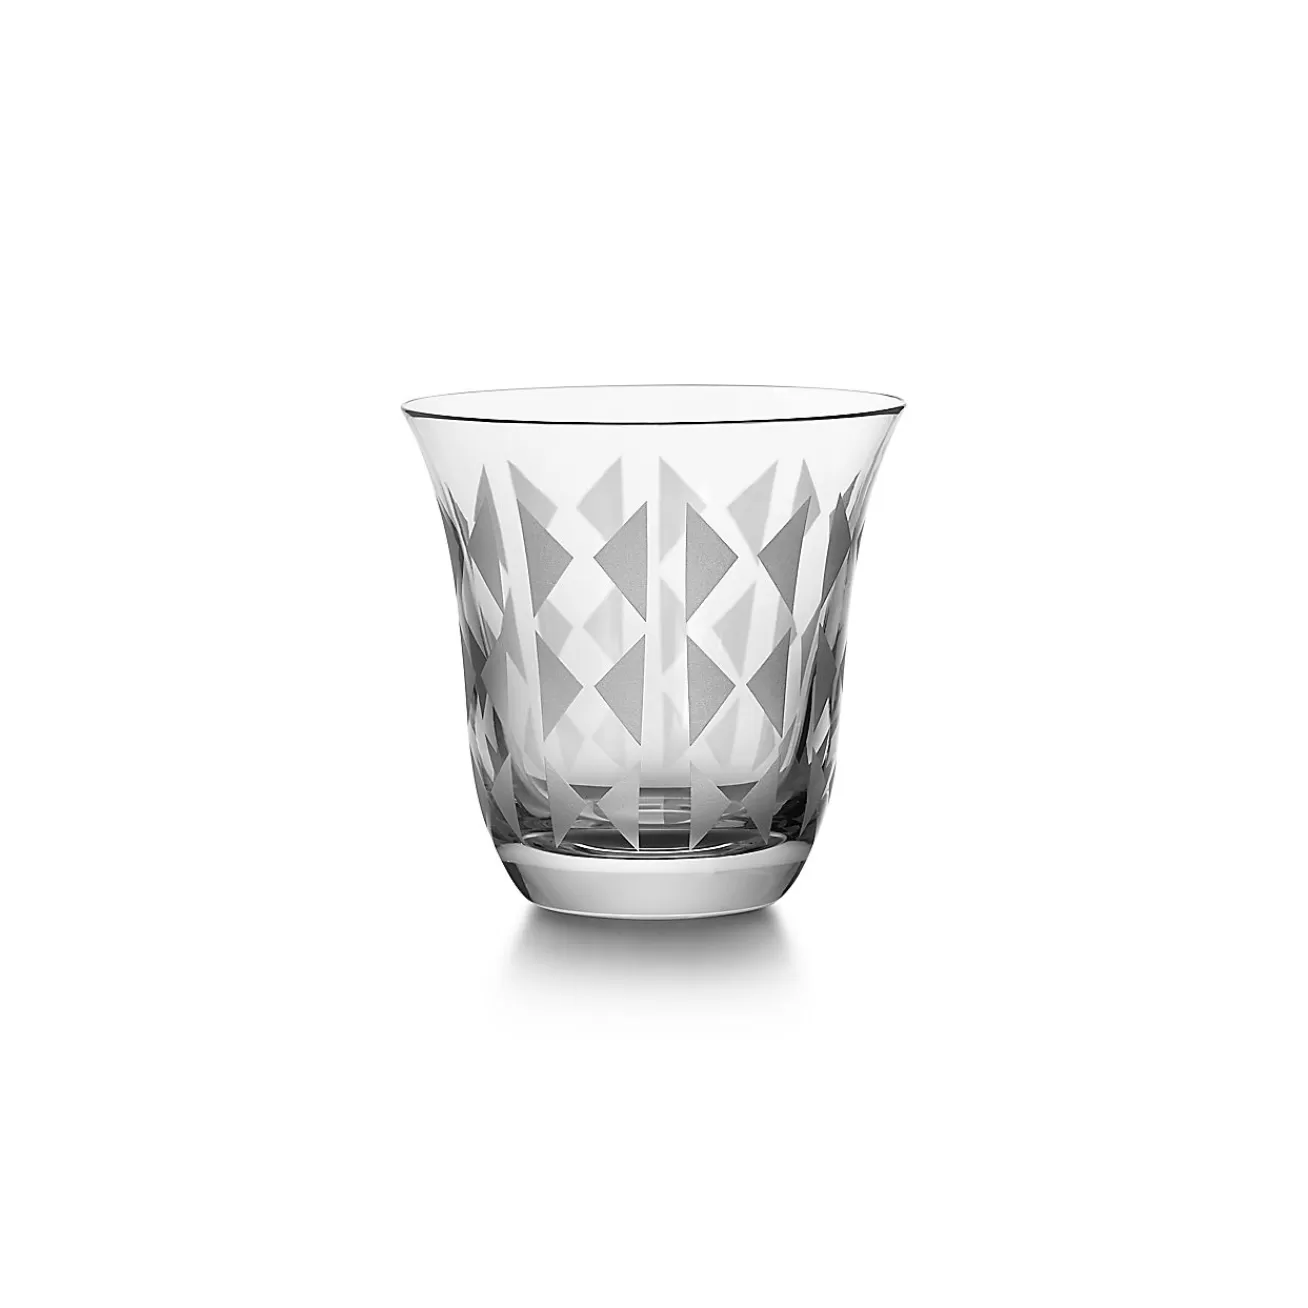 Tiffany & Co. Tiffany Berries Water Glass in Clear Lead Crystal | ^ The Home | Housewarming Gifts